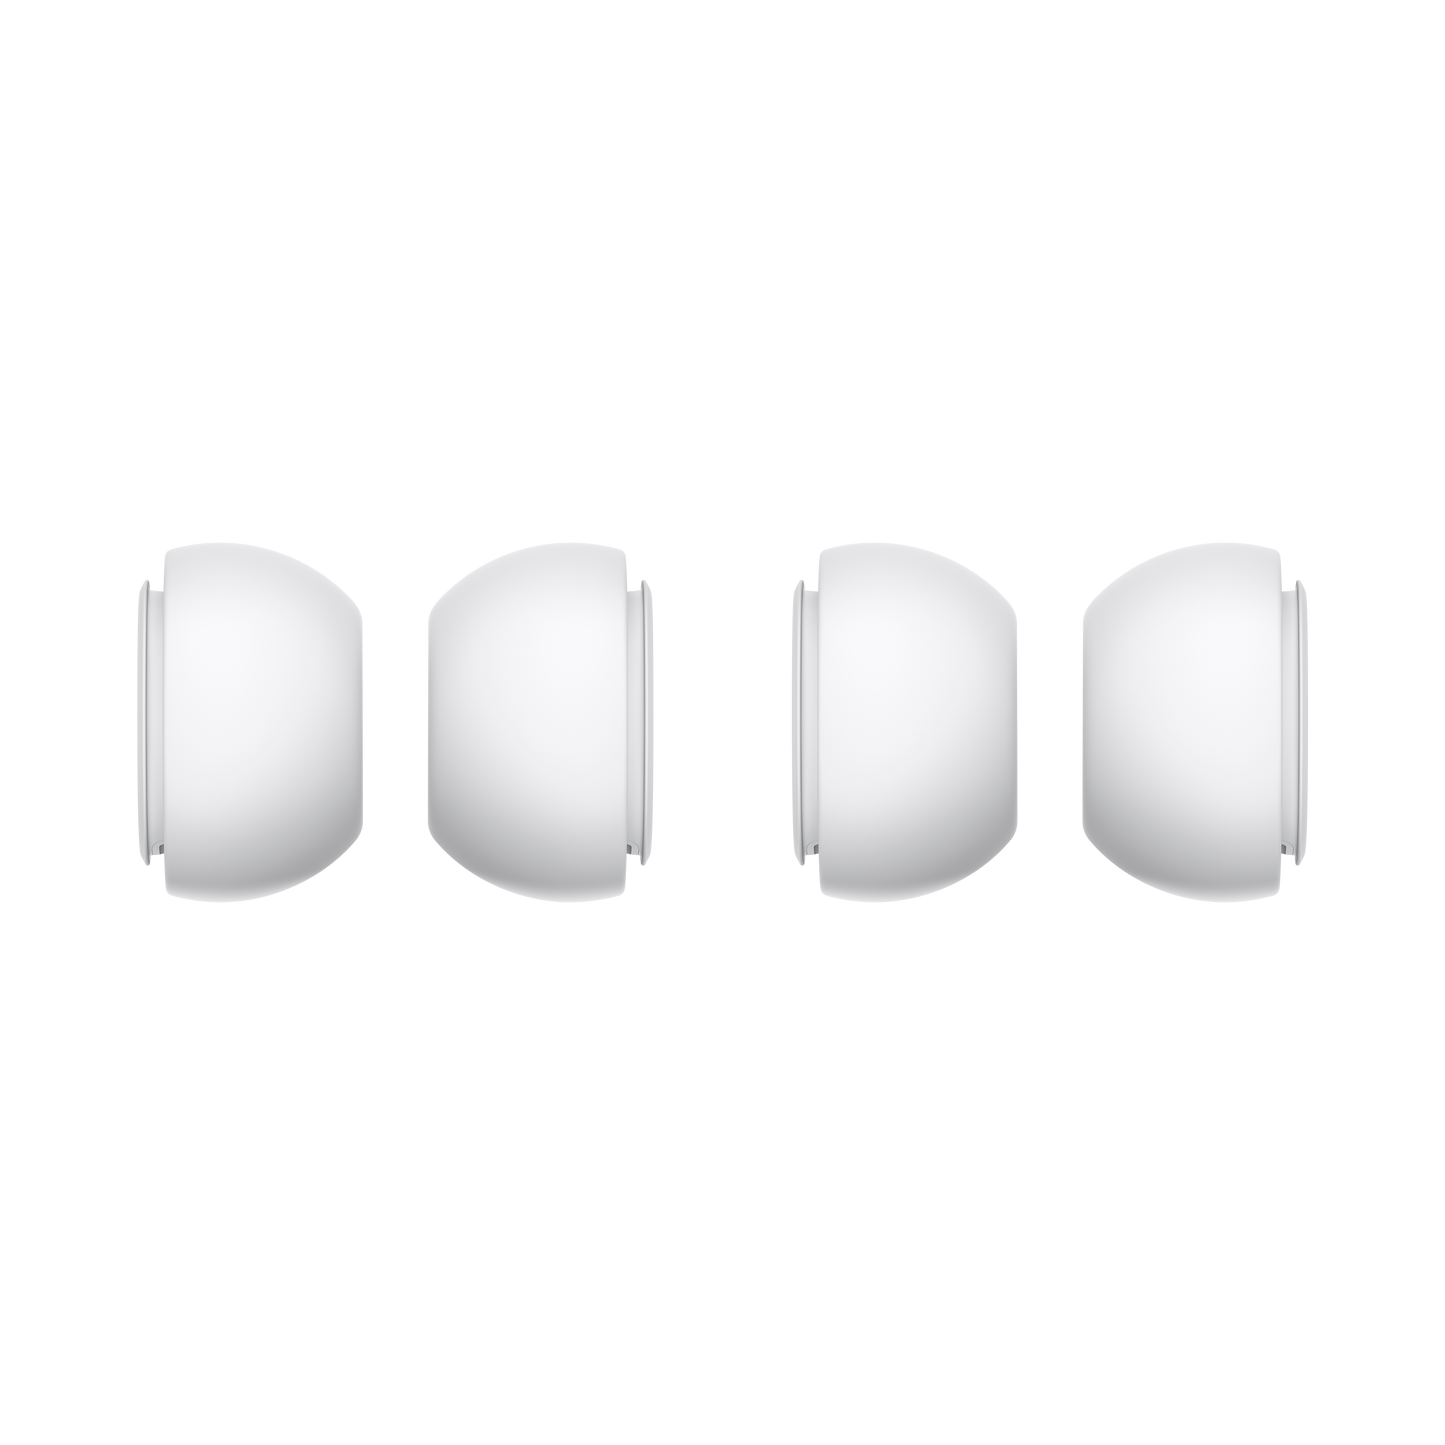 AirPods Pro (2nd generation) Ear Tips - 2 sets (Medium)